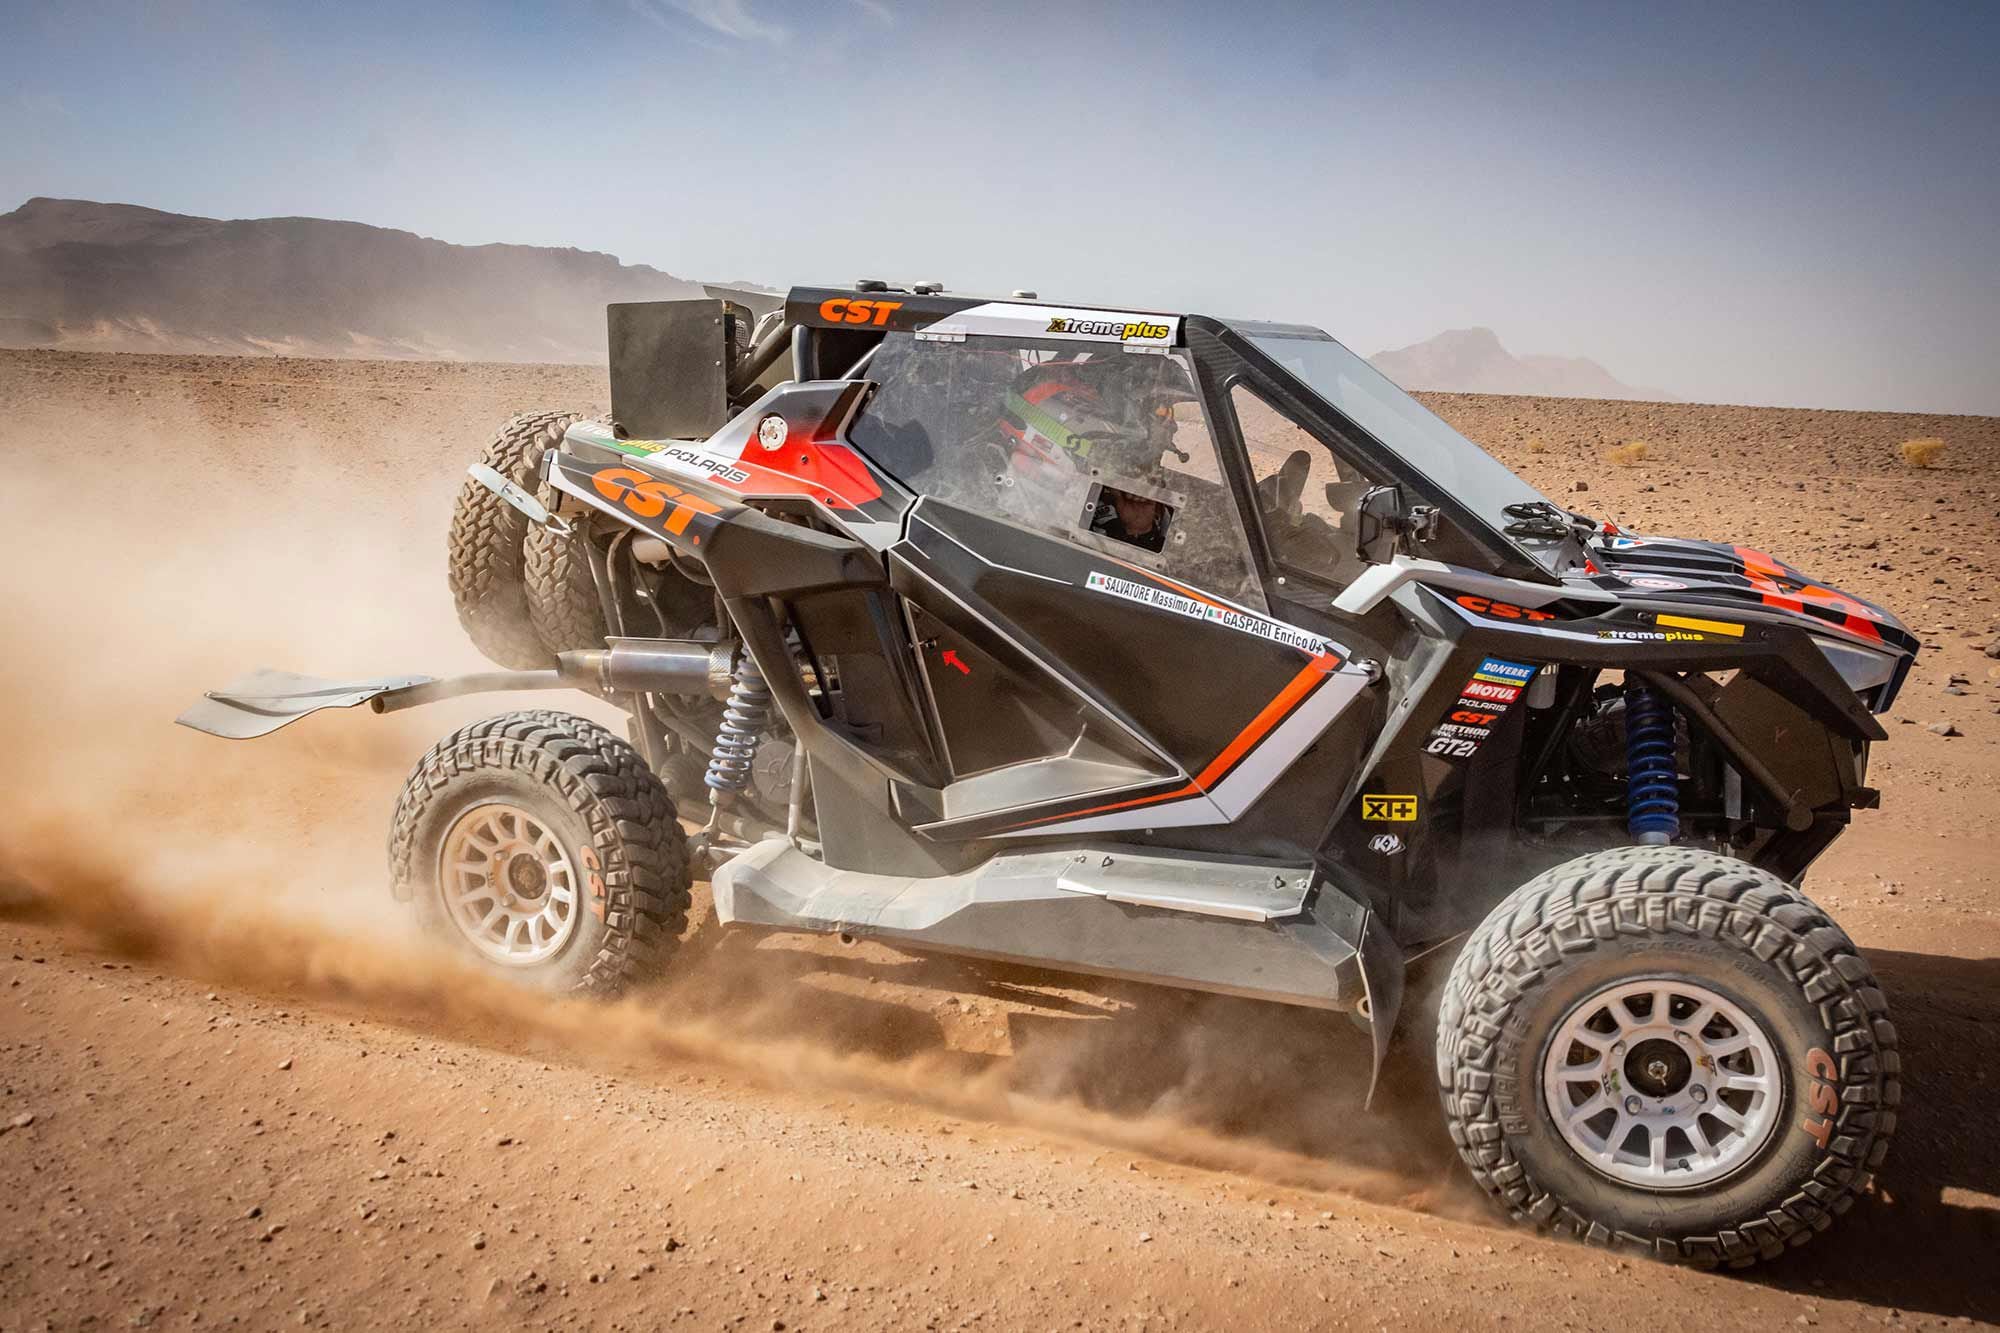 France’s Xtremeplus racing team took the Polaris RZR Pro XP to the global rally raid circuit this year, relying on its agility, speed, and durability.